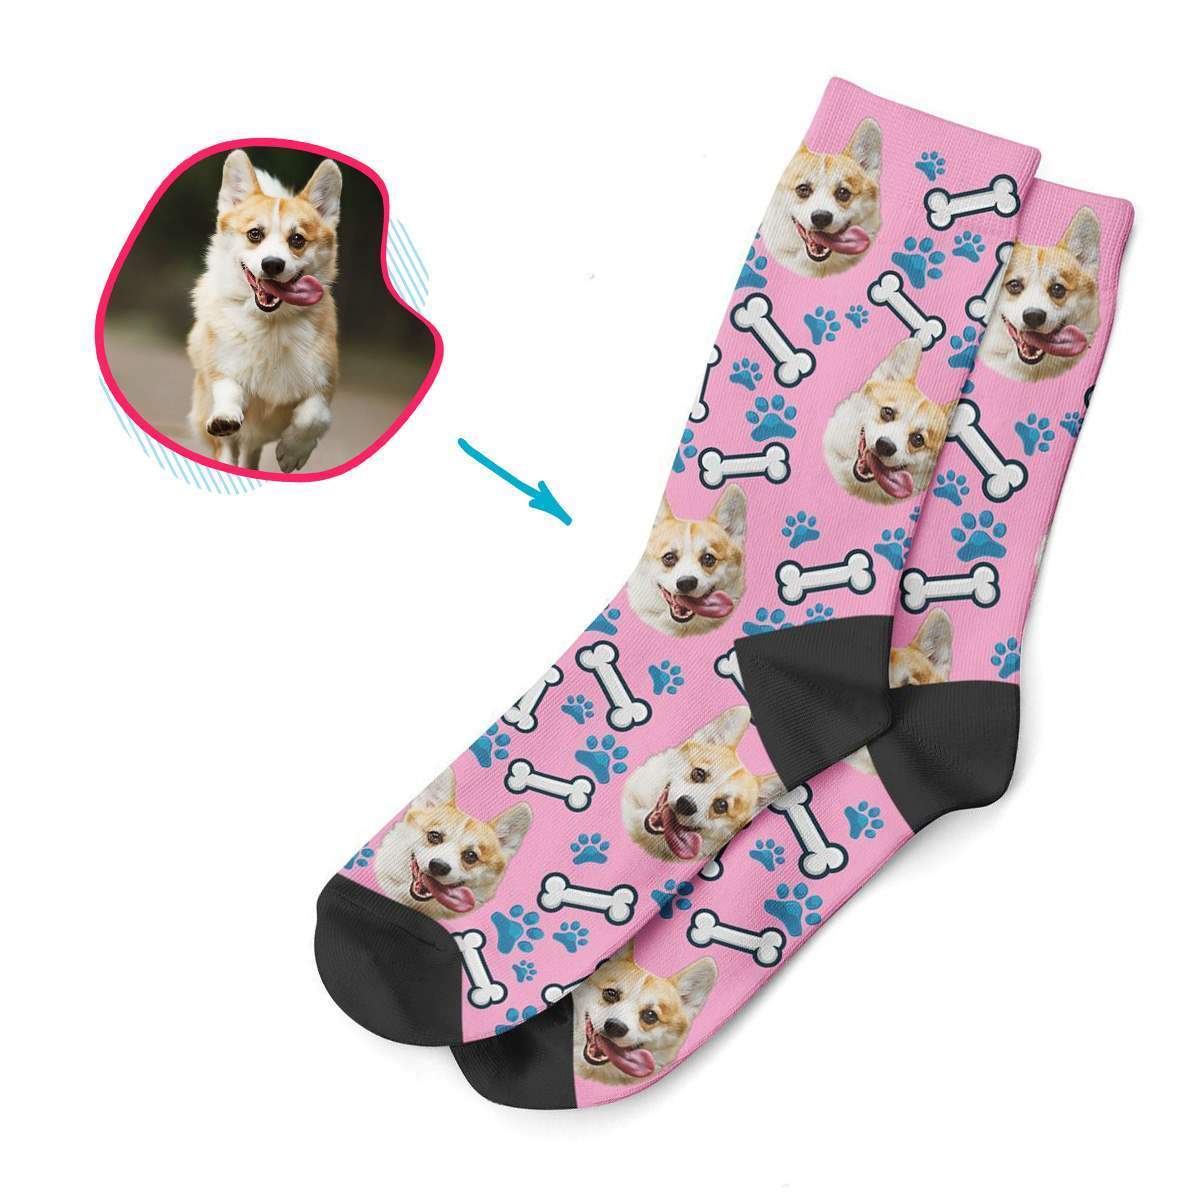 pink Dog socks personalized with photo of face printed on them